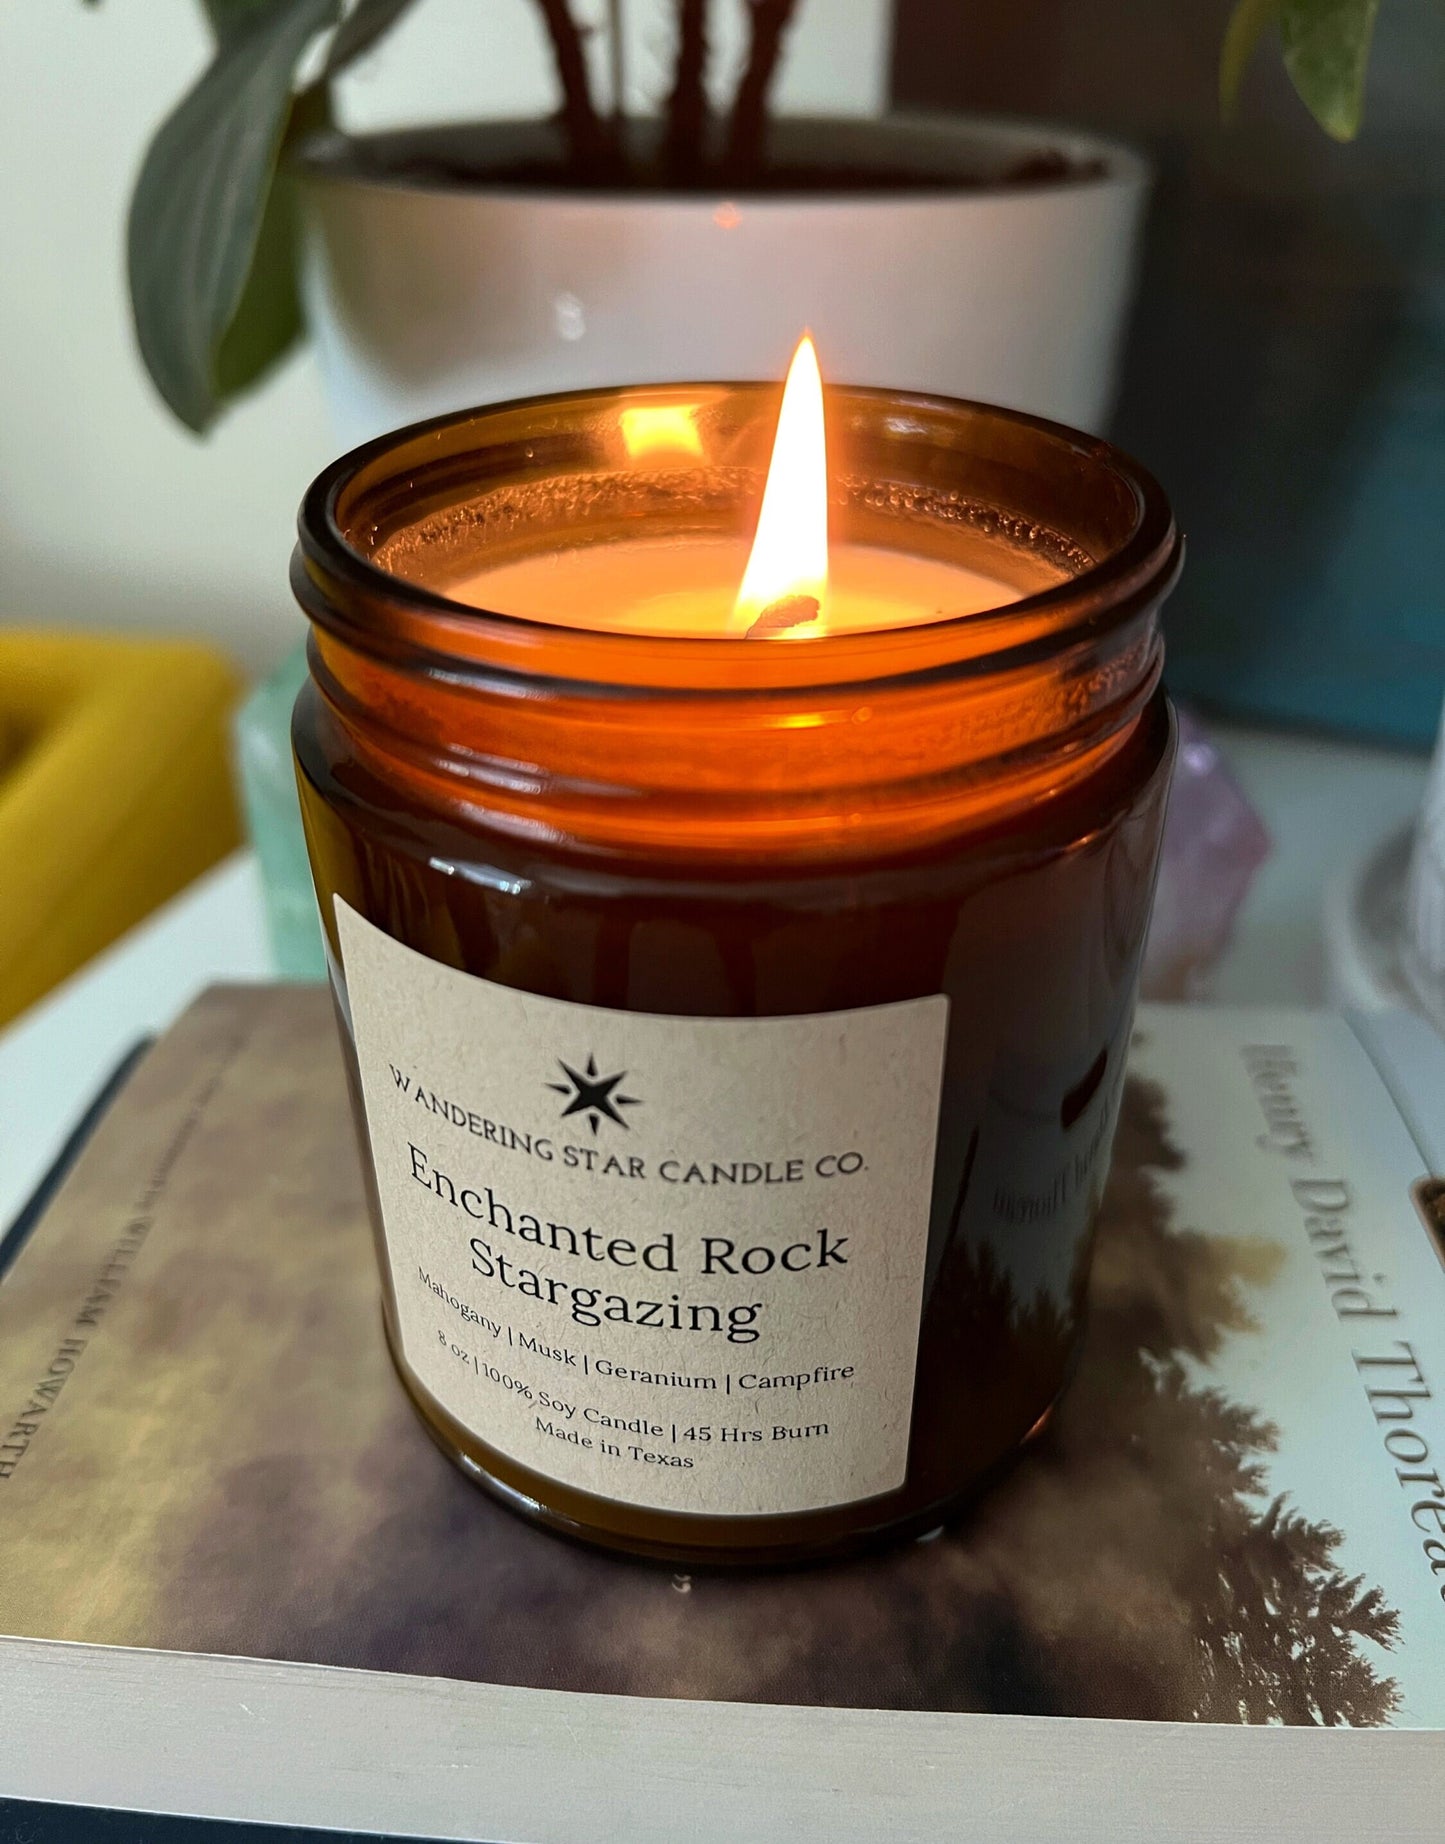 Enchanted Rock Stargazing | Mahogany Teakwood Campfire Musk Candle | Amber Jar Candle | Texas Gifts | Camping Hiking Gifts | Made in Texas